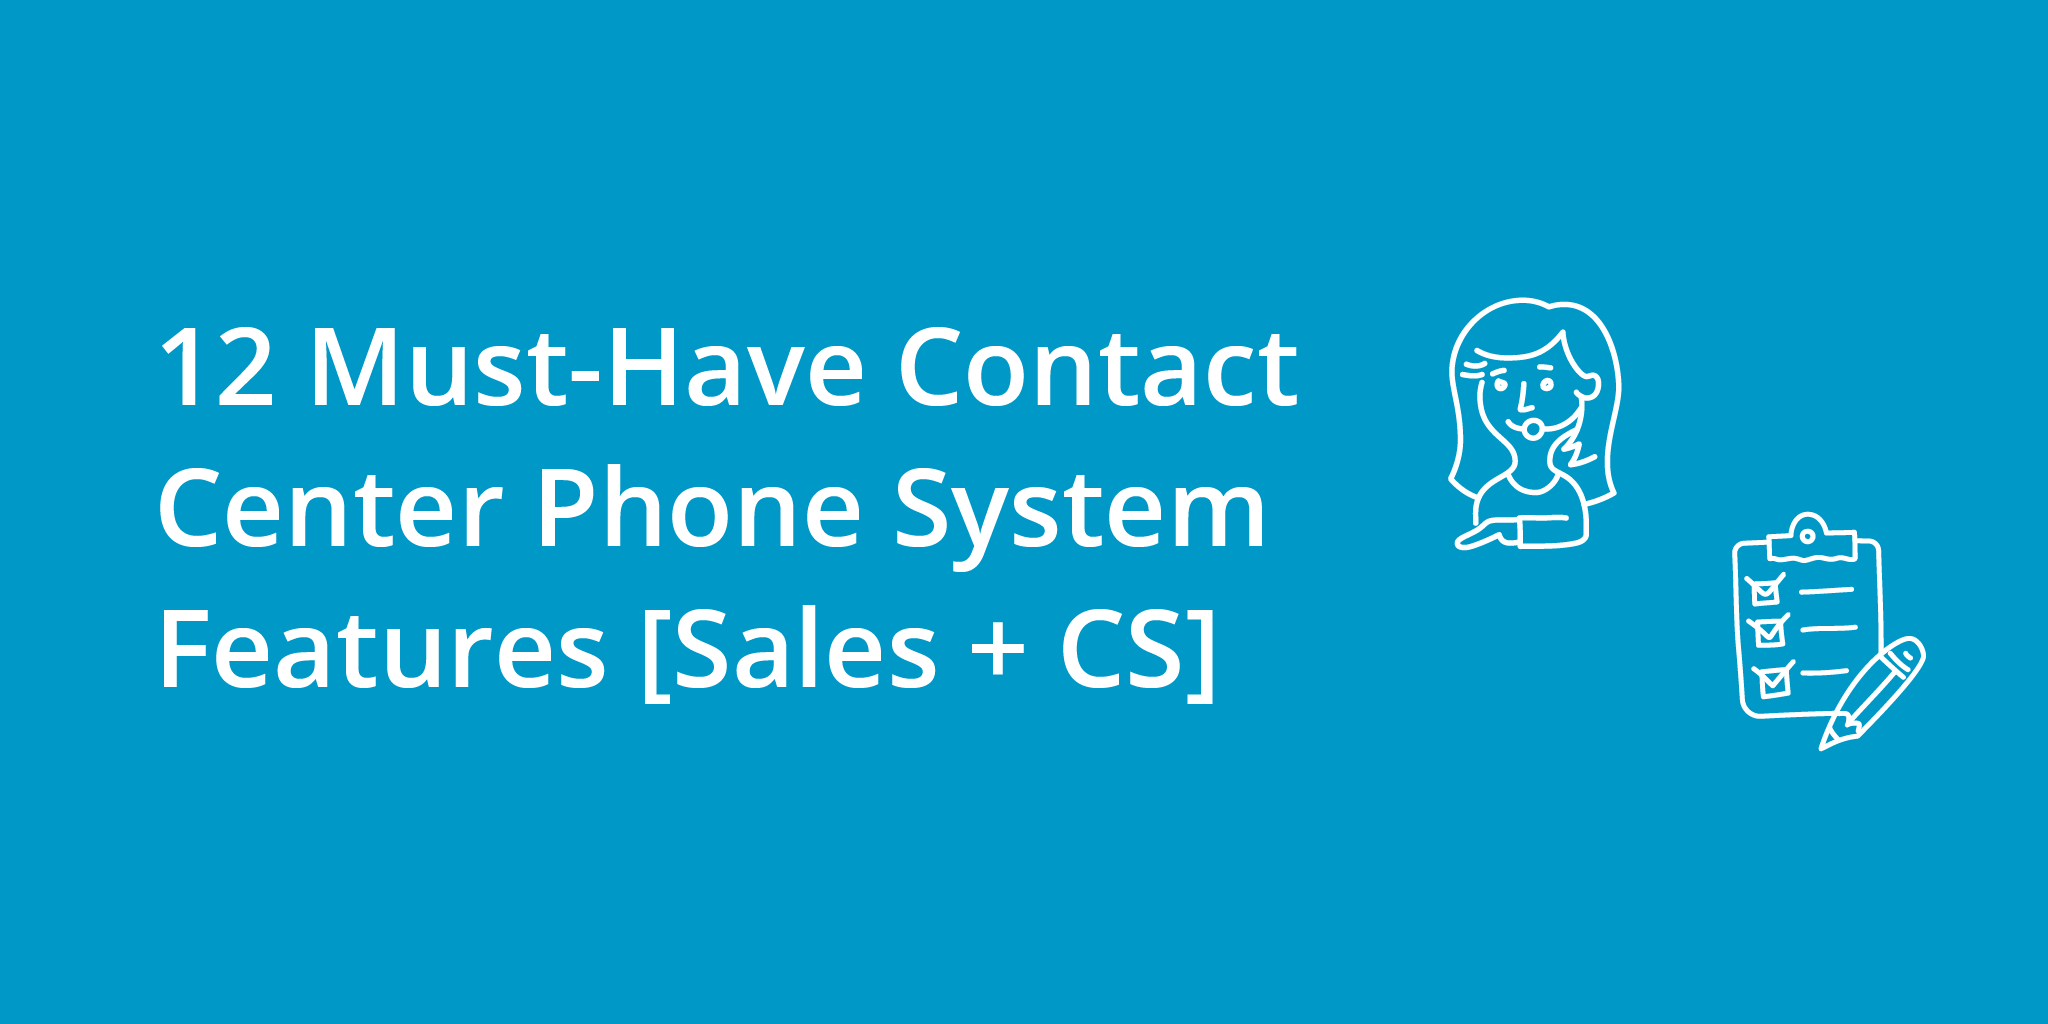 12 Must-Have Contact Center Phone System Features | Telephones for business